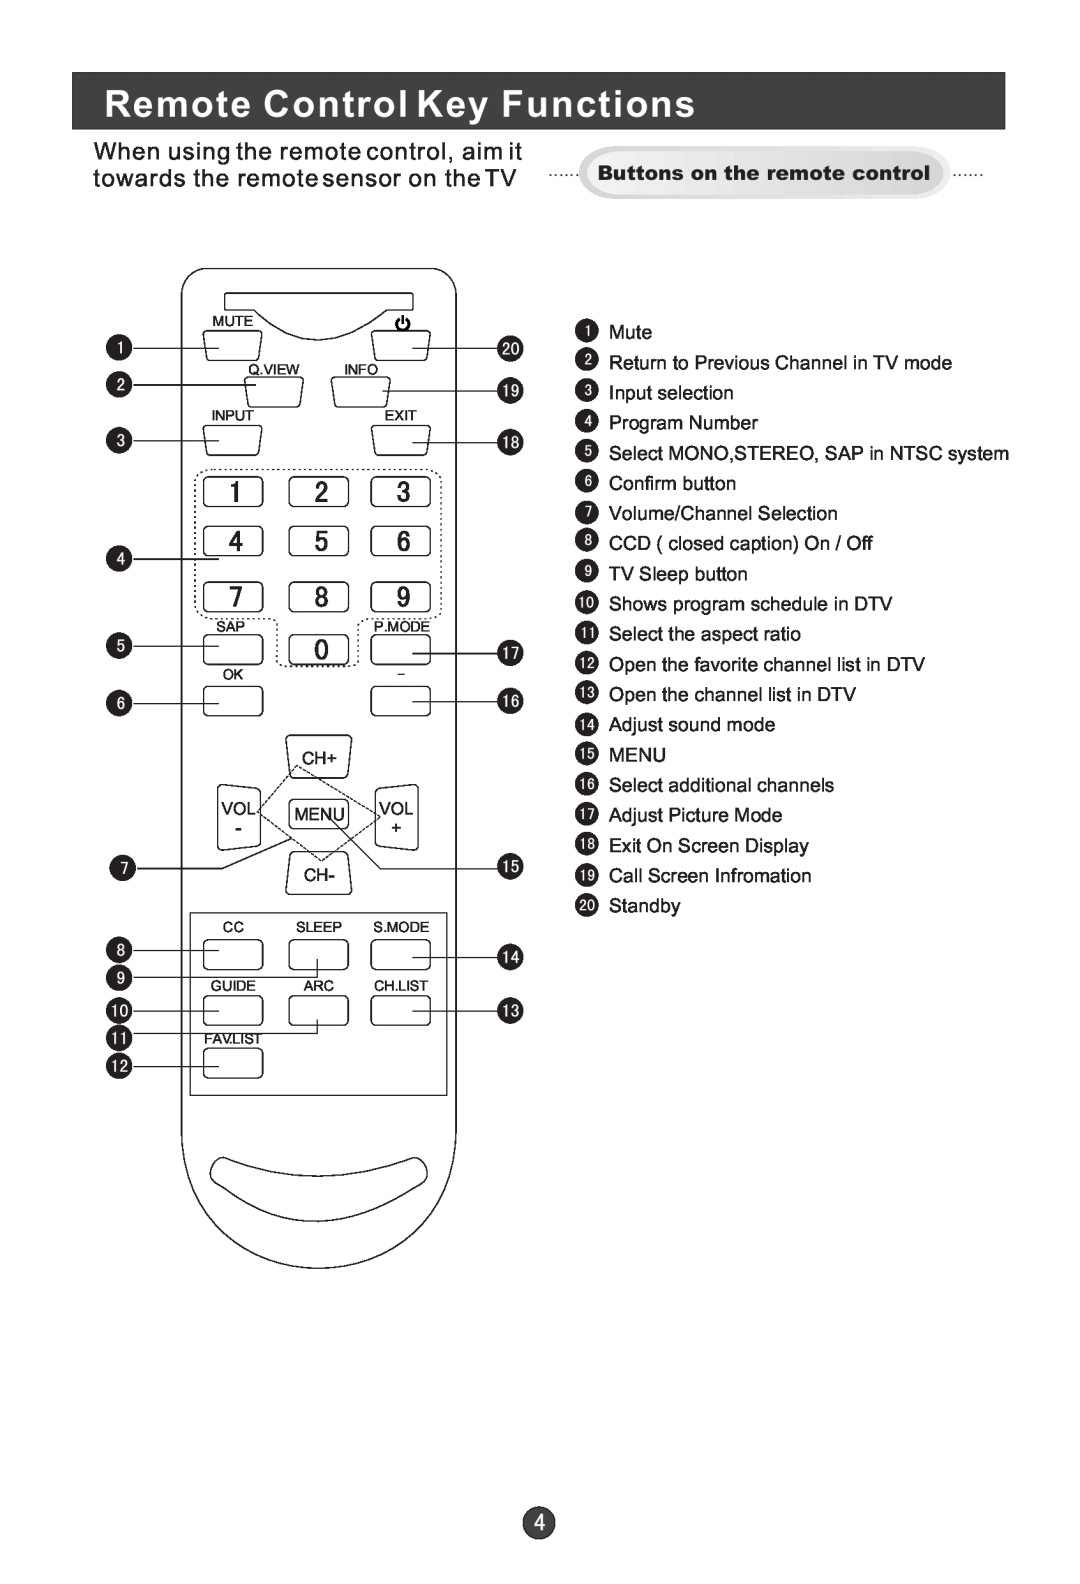 Haier HL15B user manual Remote Control Key Functions, towards the remote sensor on the TV, Buttons on the remote control 